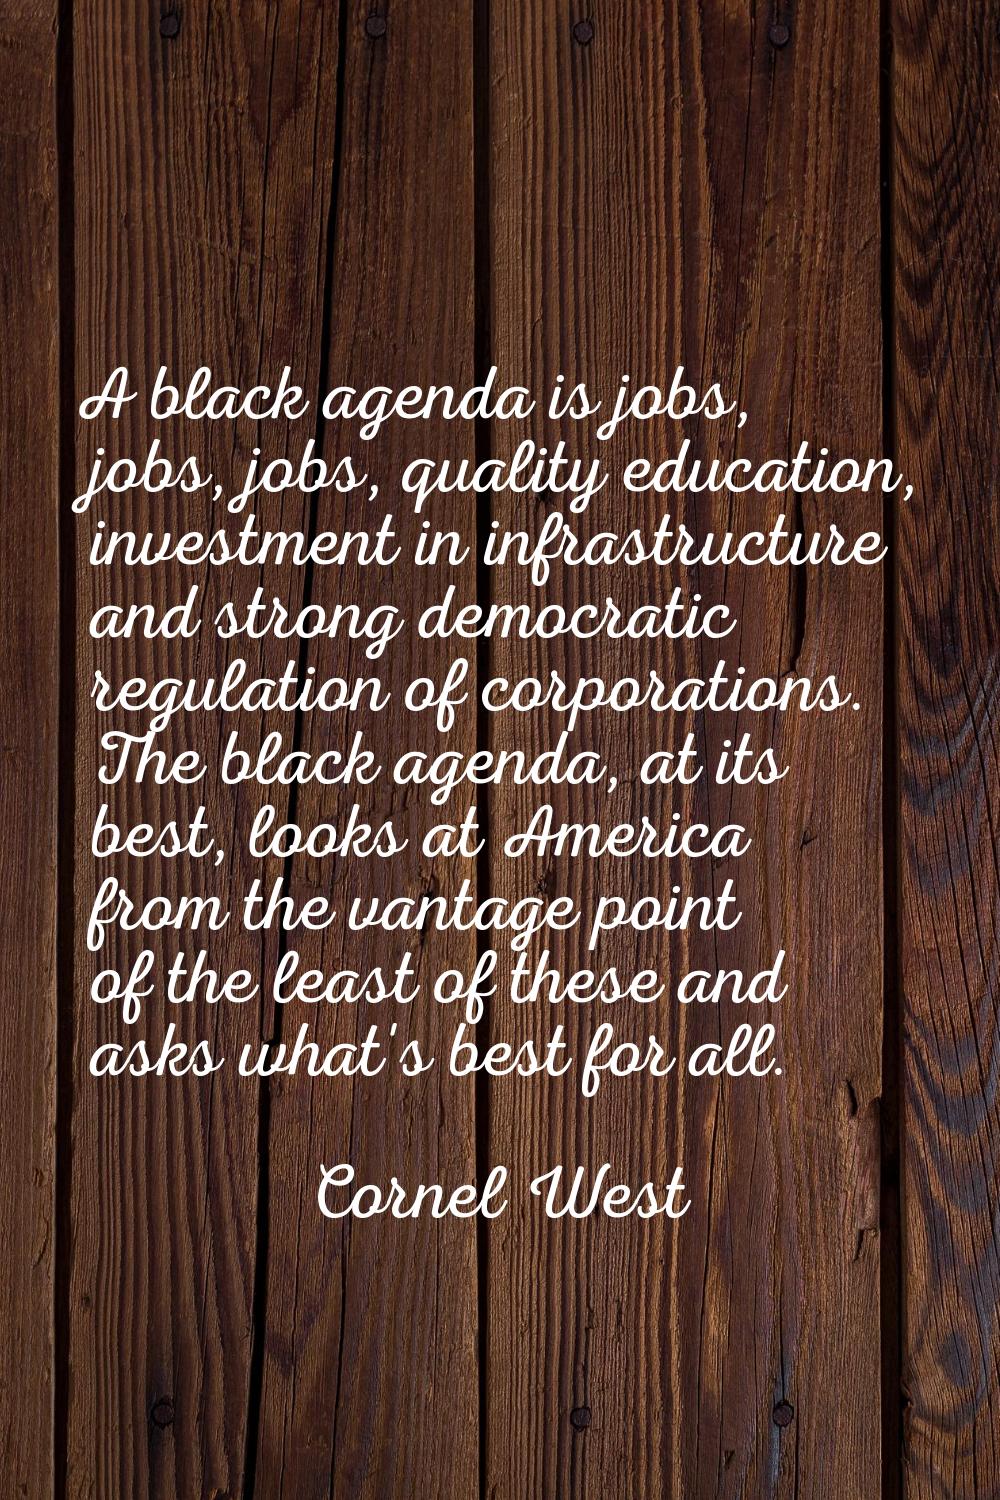 A black agenda is jobs, jobs, jobs, quality education, investment in infrastructure and strong demo